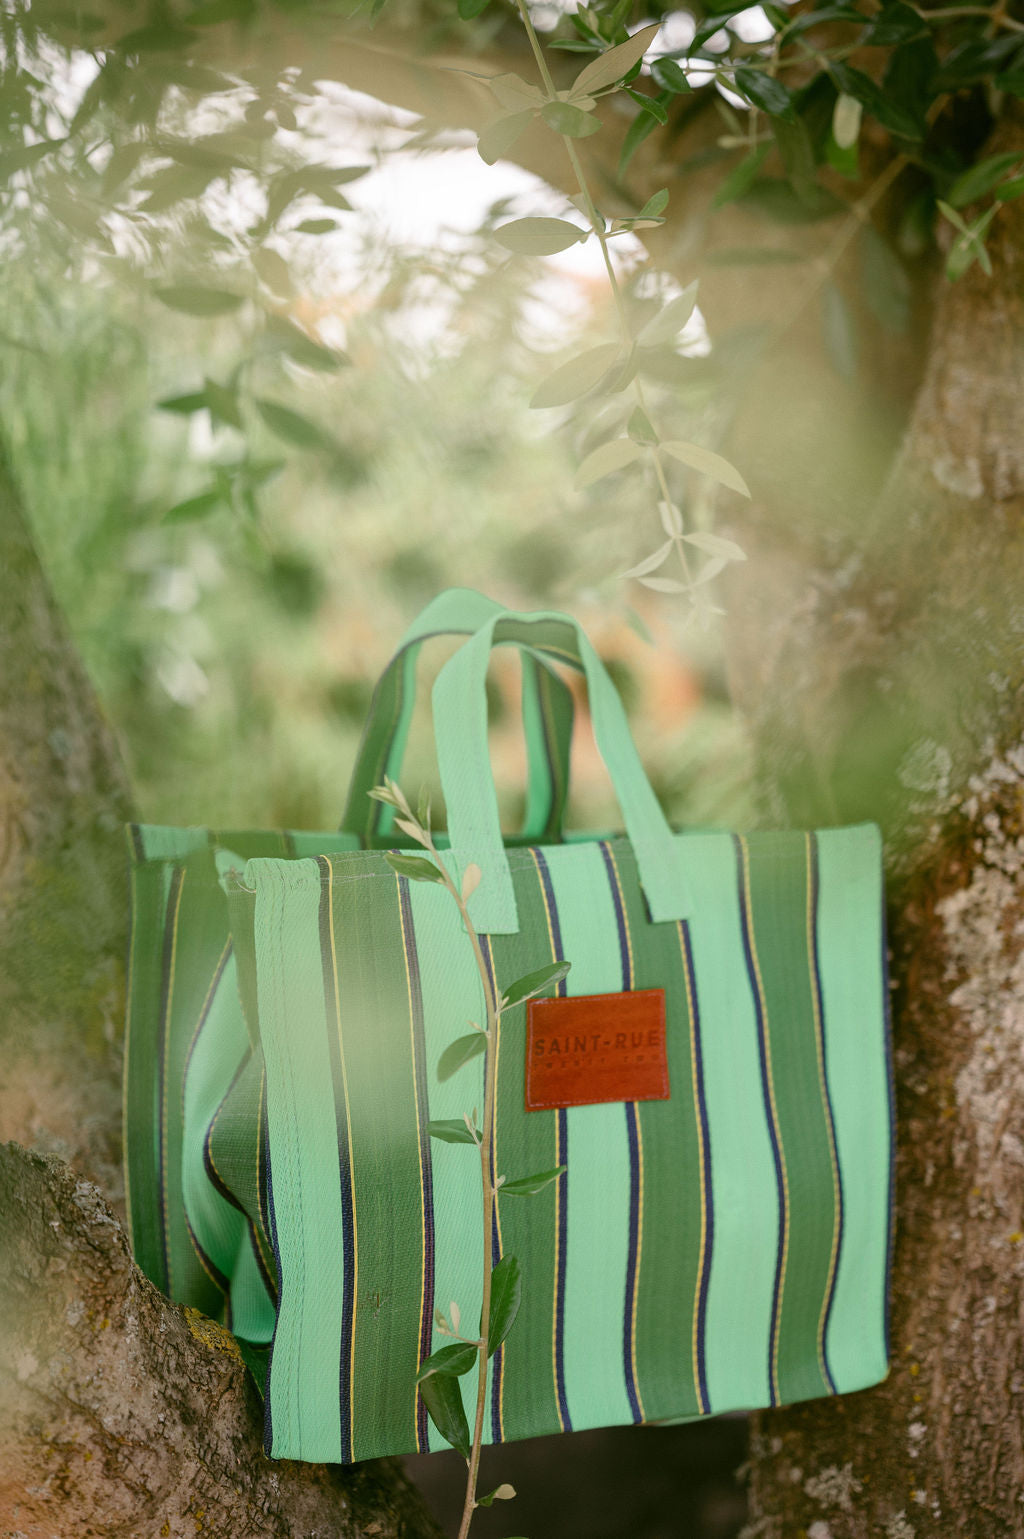 Saint Rue 22 Small Tote - Green on Green